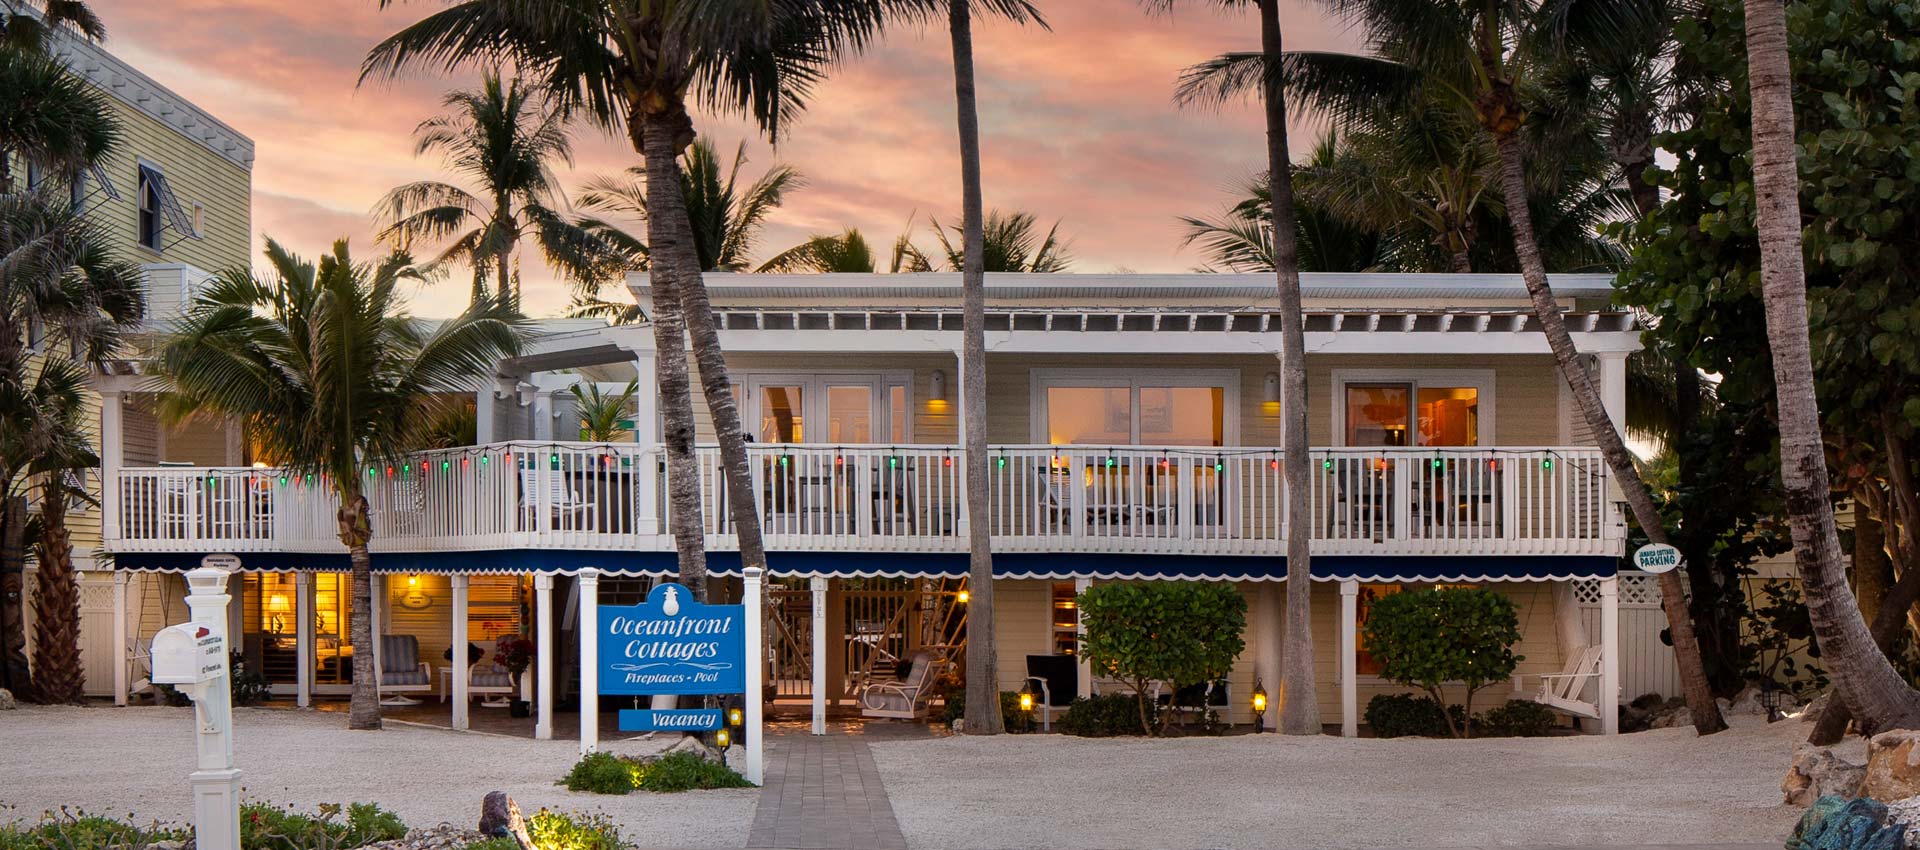 Oceanfront Cottages, your home away from home by the sea